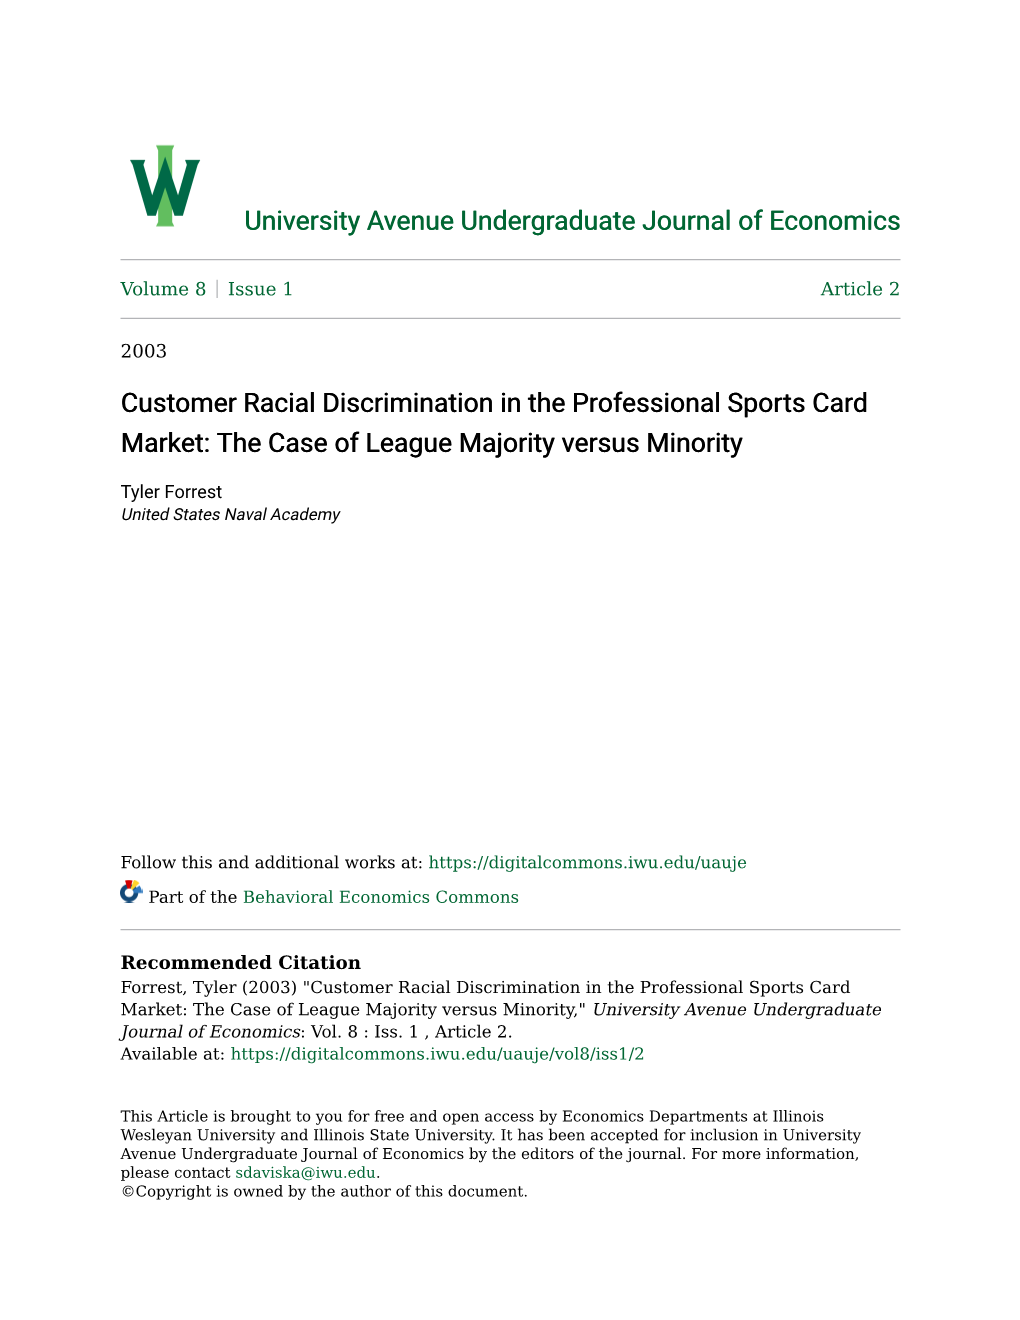 Customer Racial Discrimination in the Professional Sports Card Market: the Case of League Majority Versus Minority